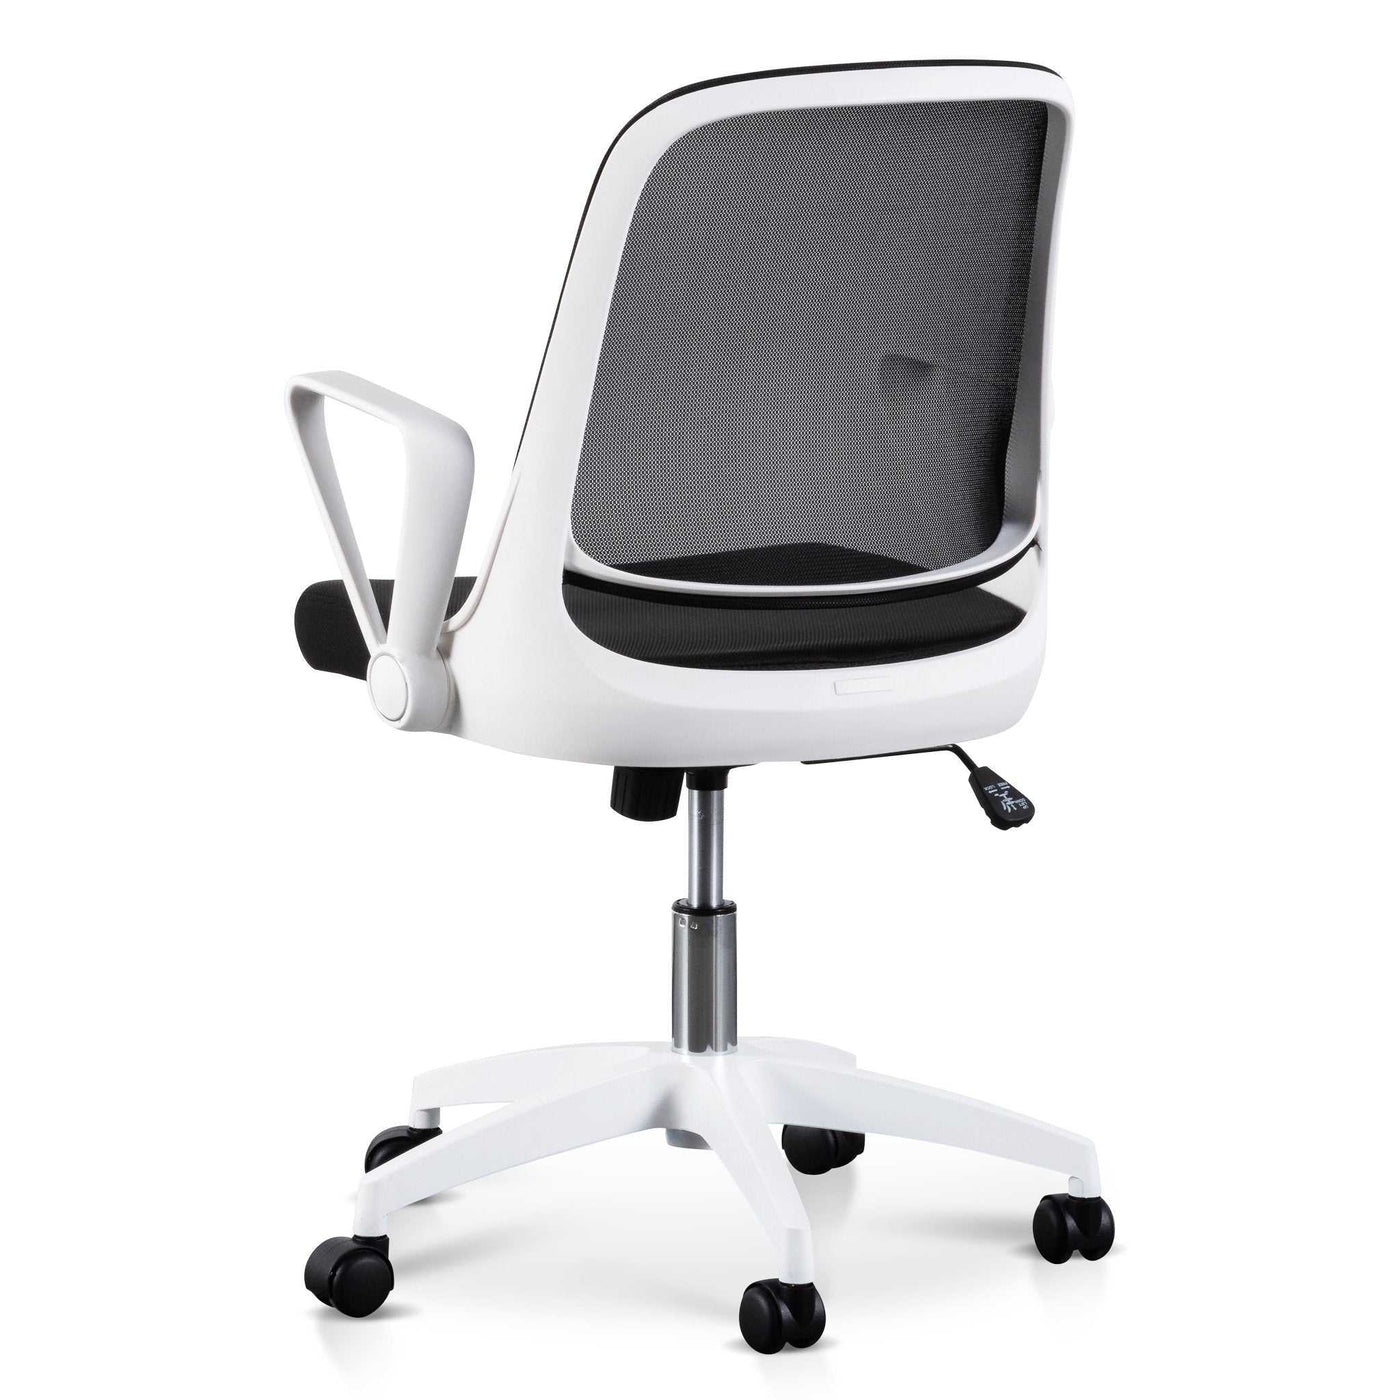 Black Office Chair - White Arm and Base